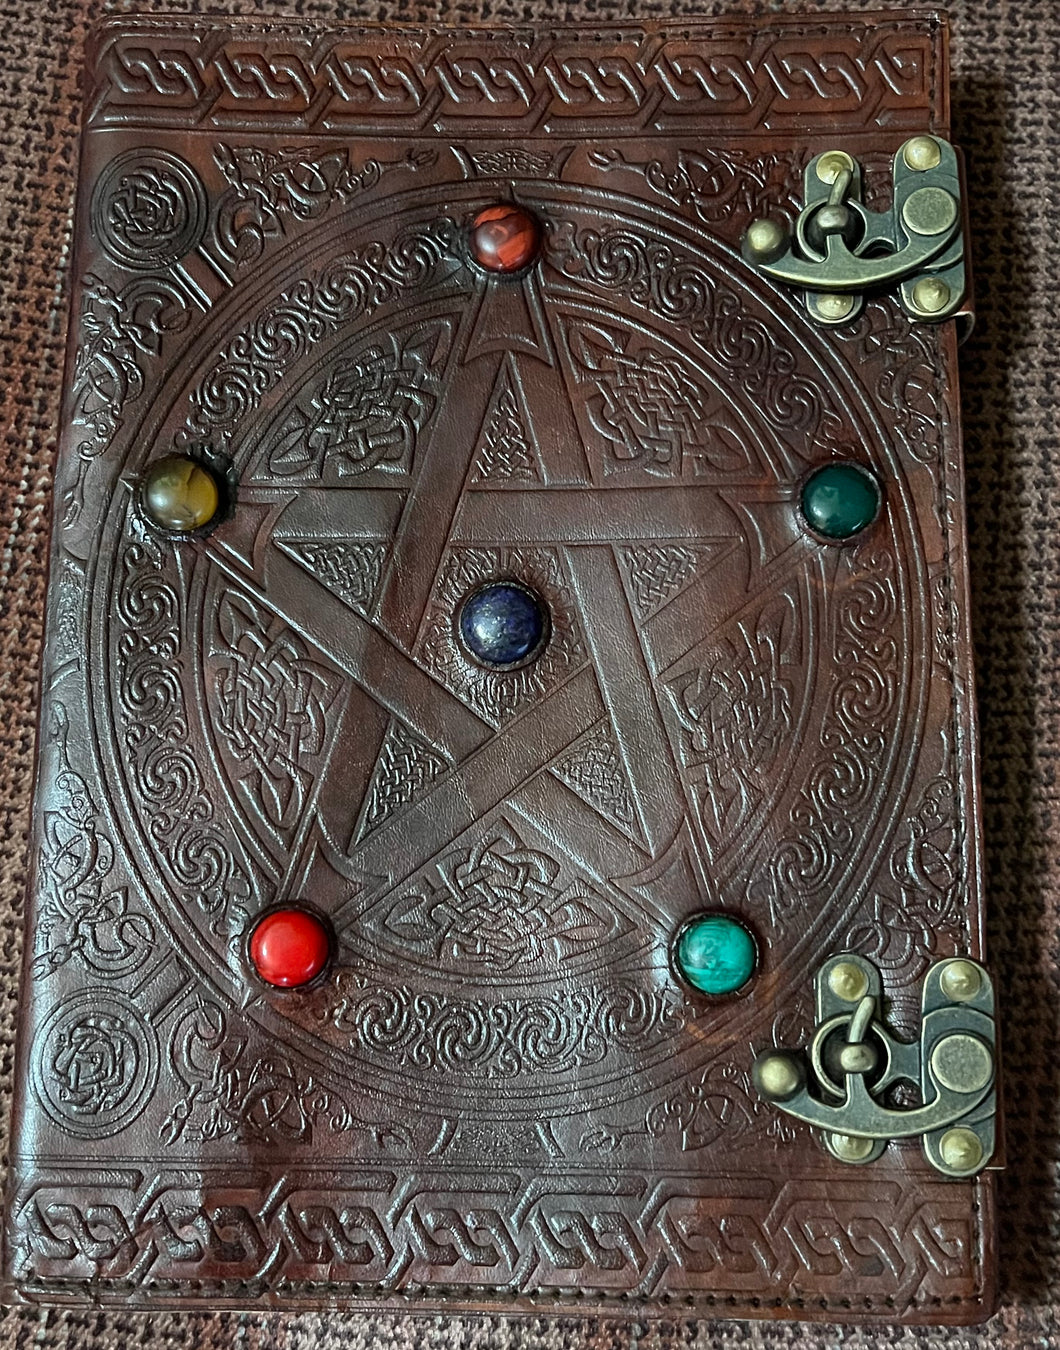 10”x7” Journal, Pentacle with Stones